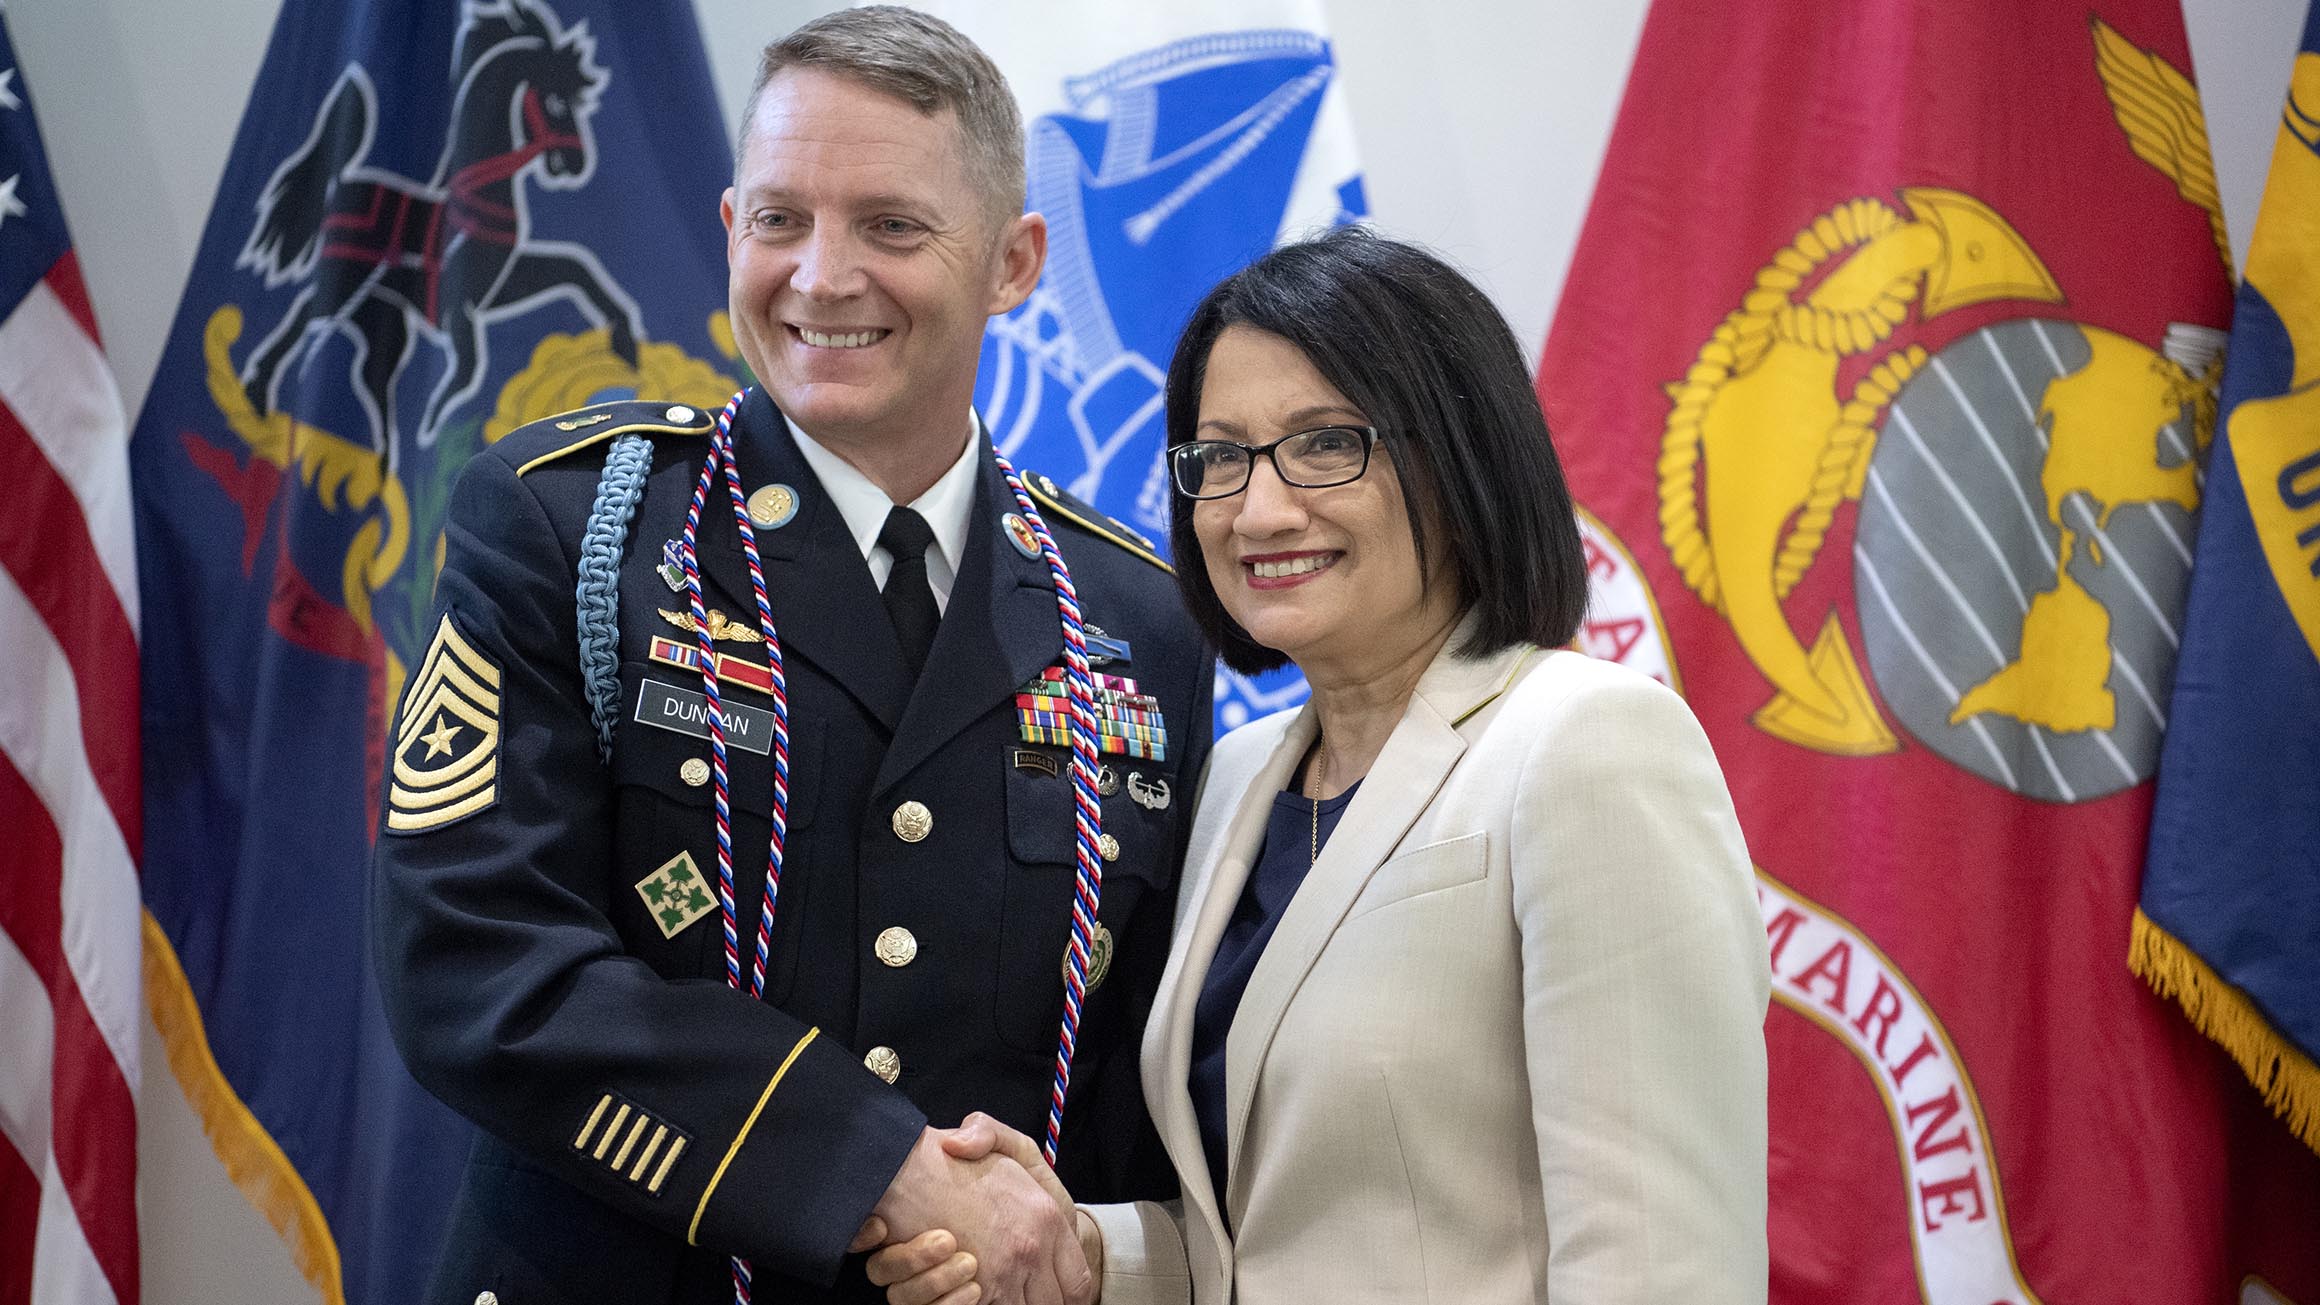 President Neeli Bendapudi shakes hands with a member of the Army with flags of the military in the background.